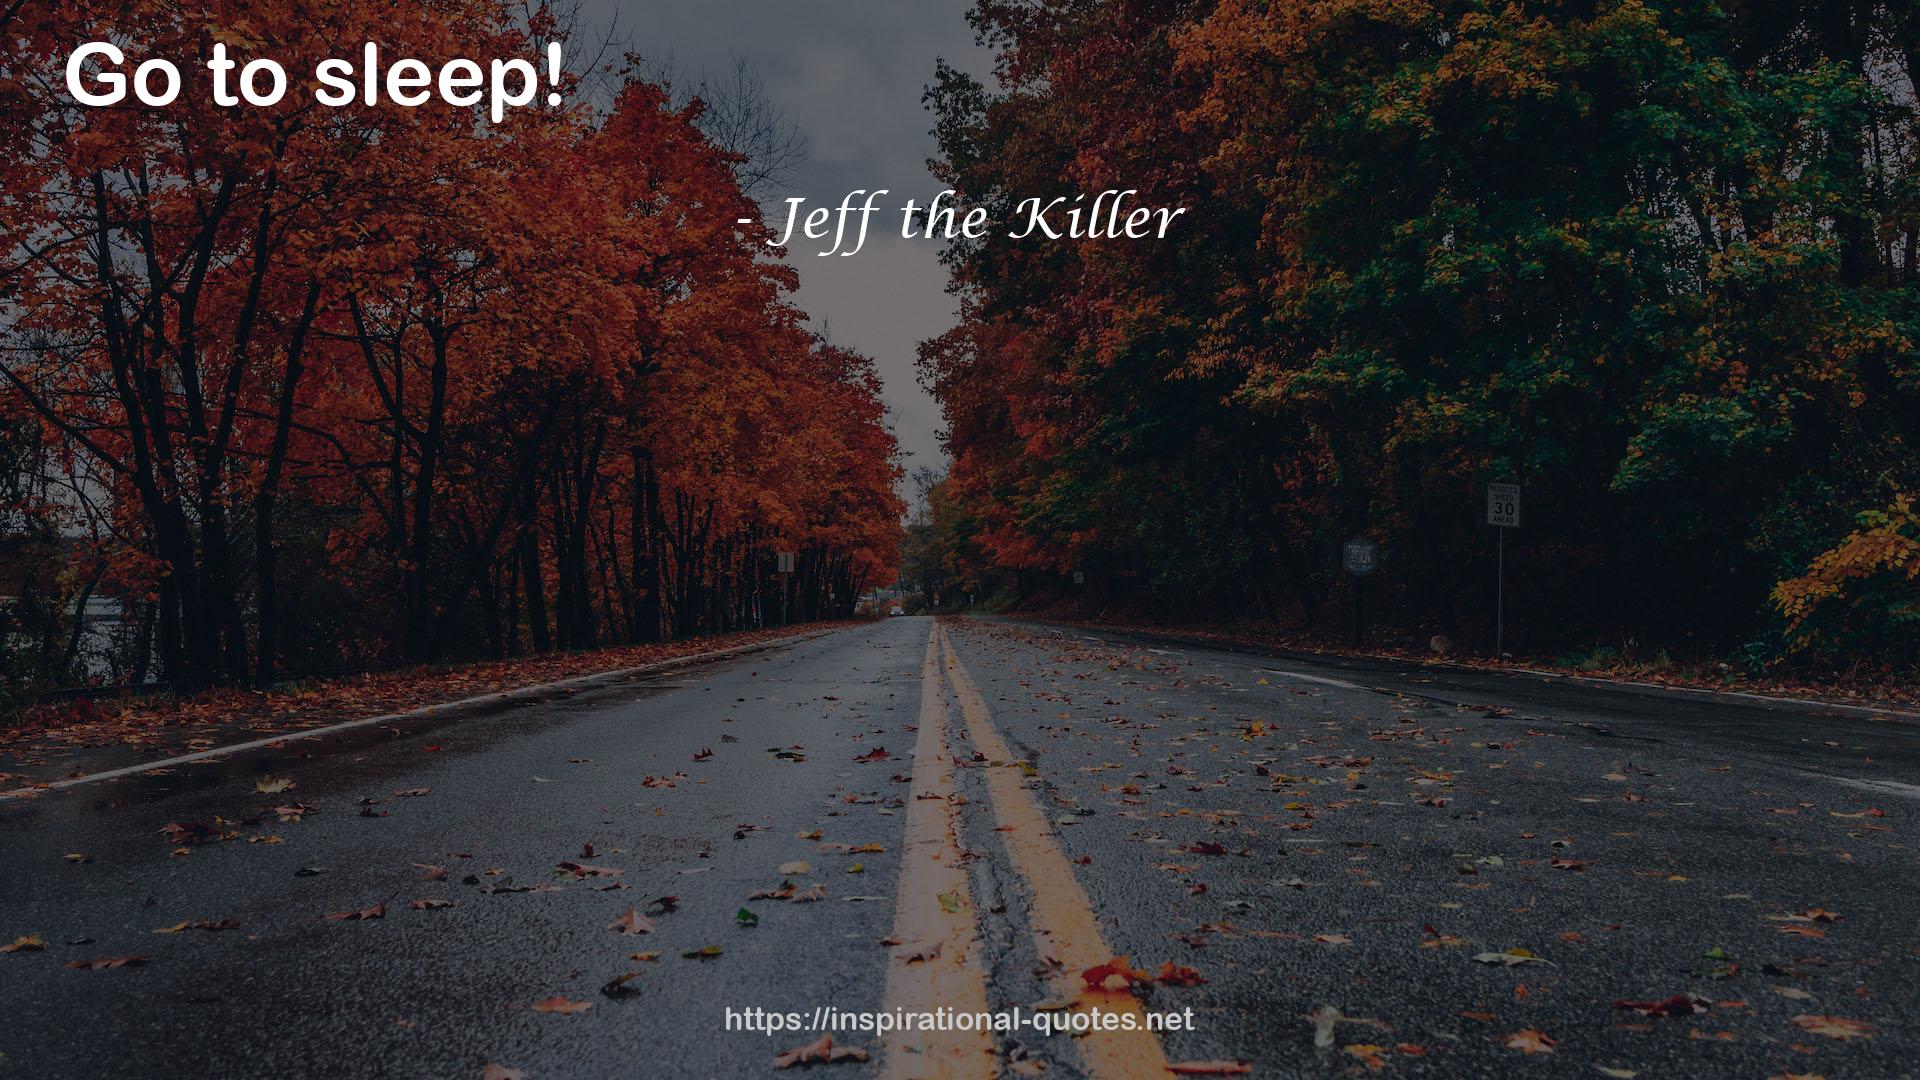 Jeff the Killer QUOTES